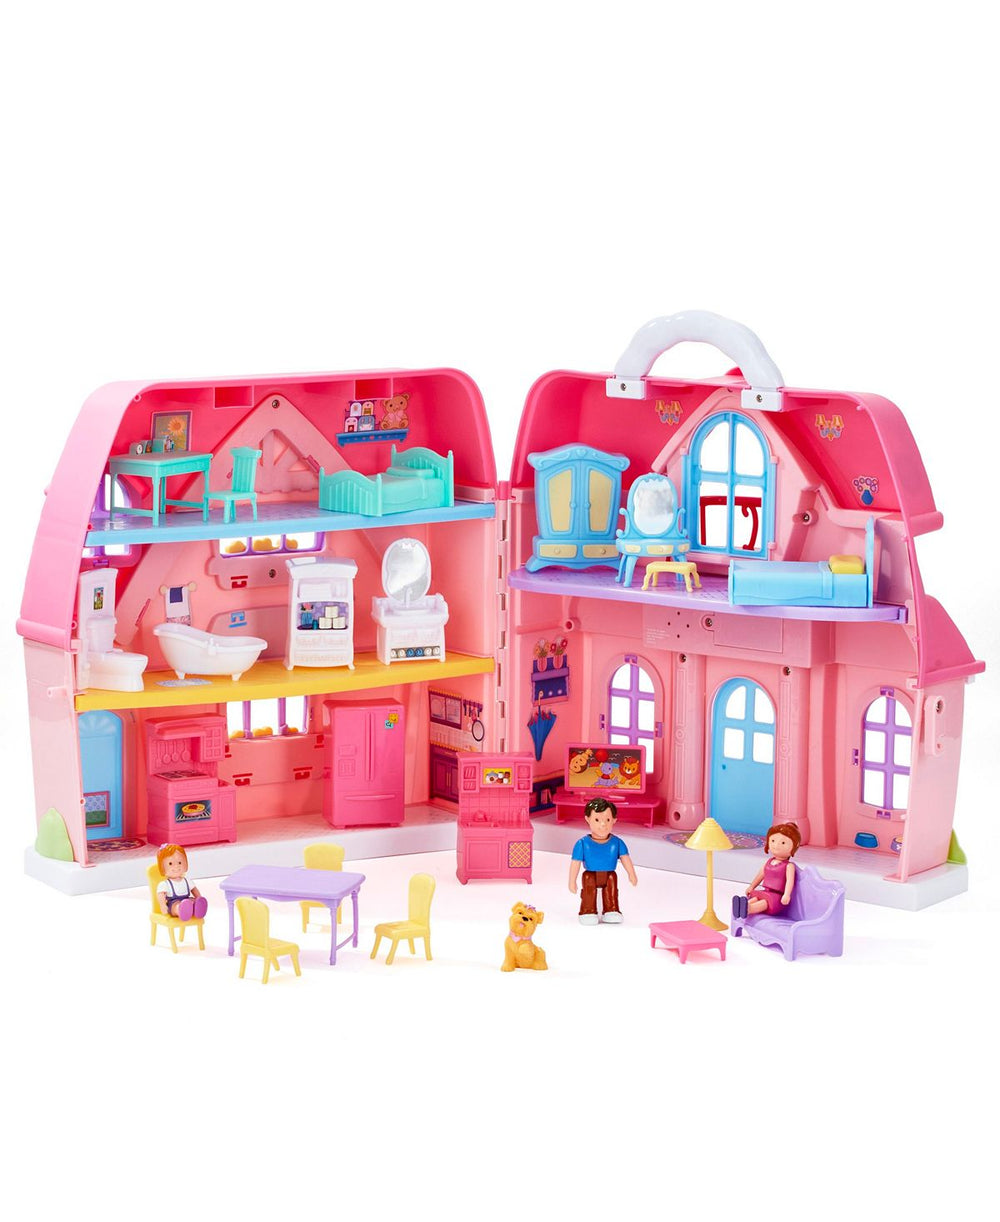 Toys R Us Happy Together Cottage Dollhouse Playset with Sound Effects